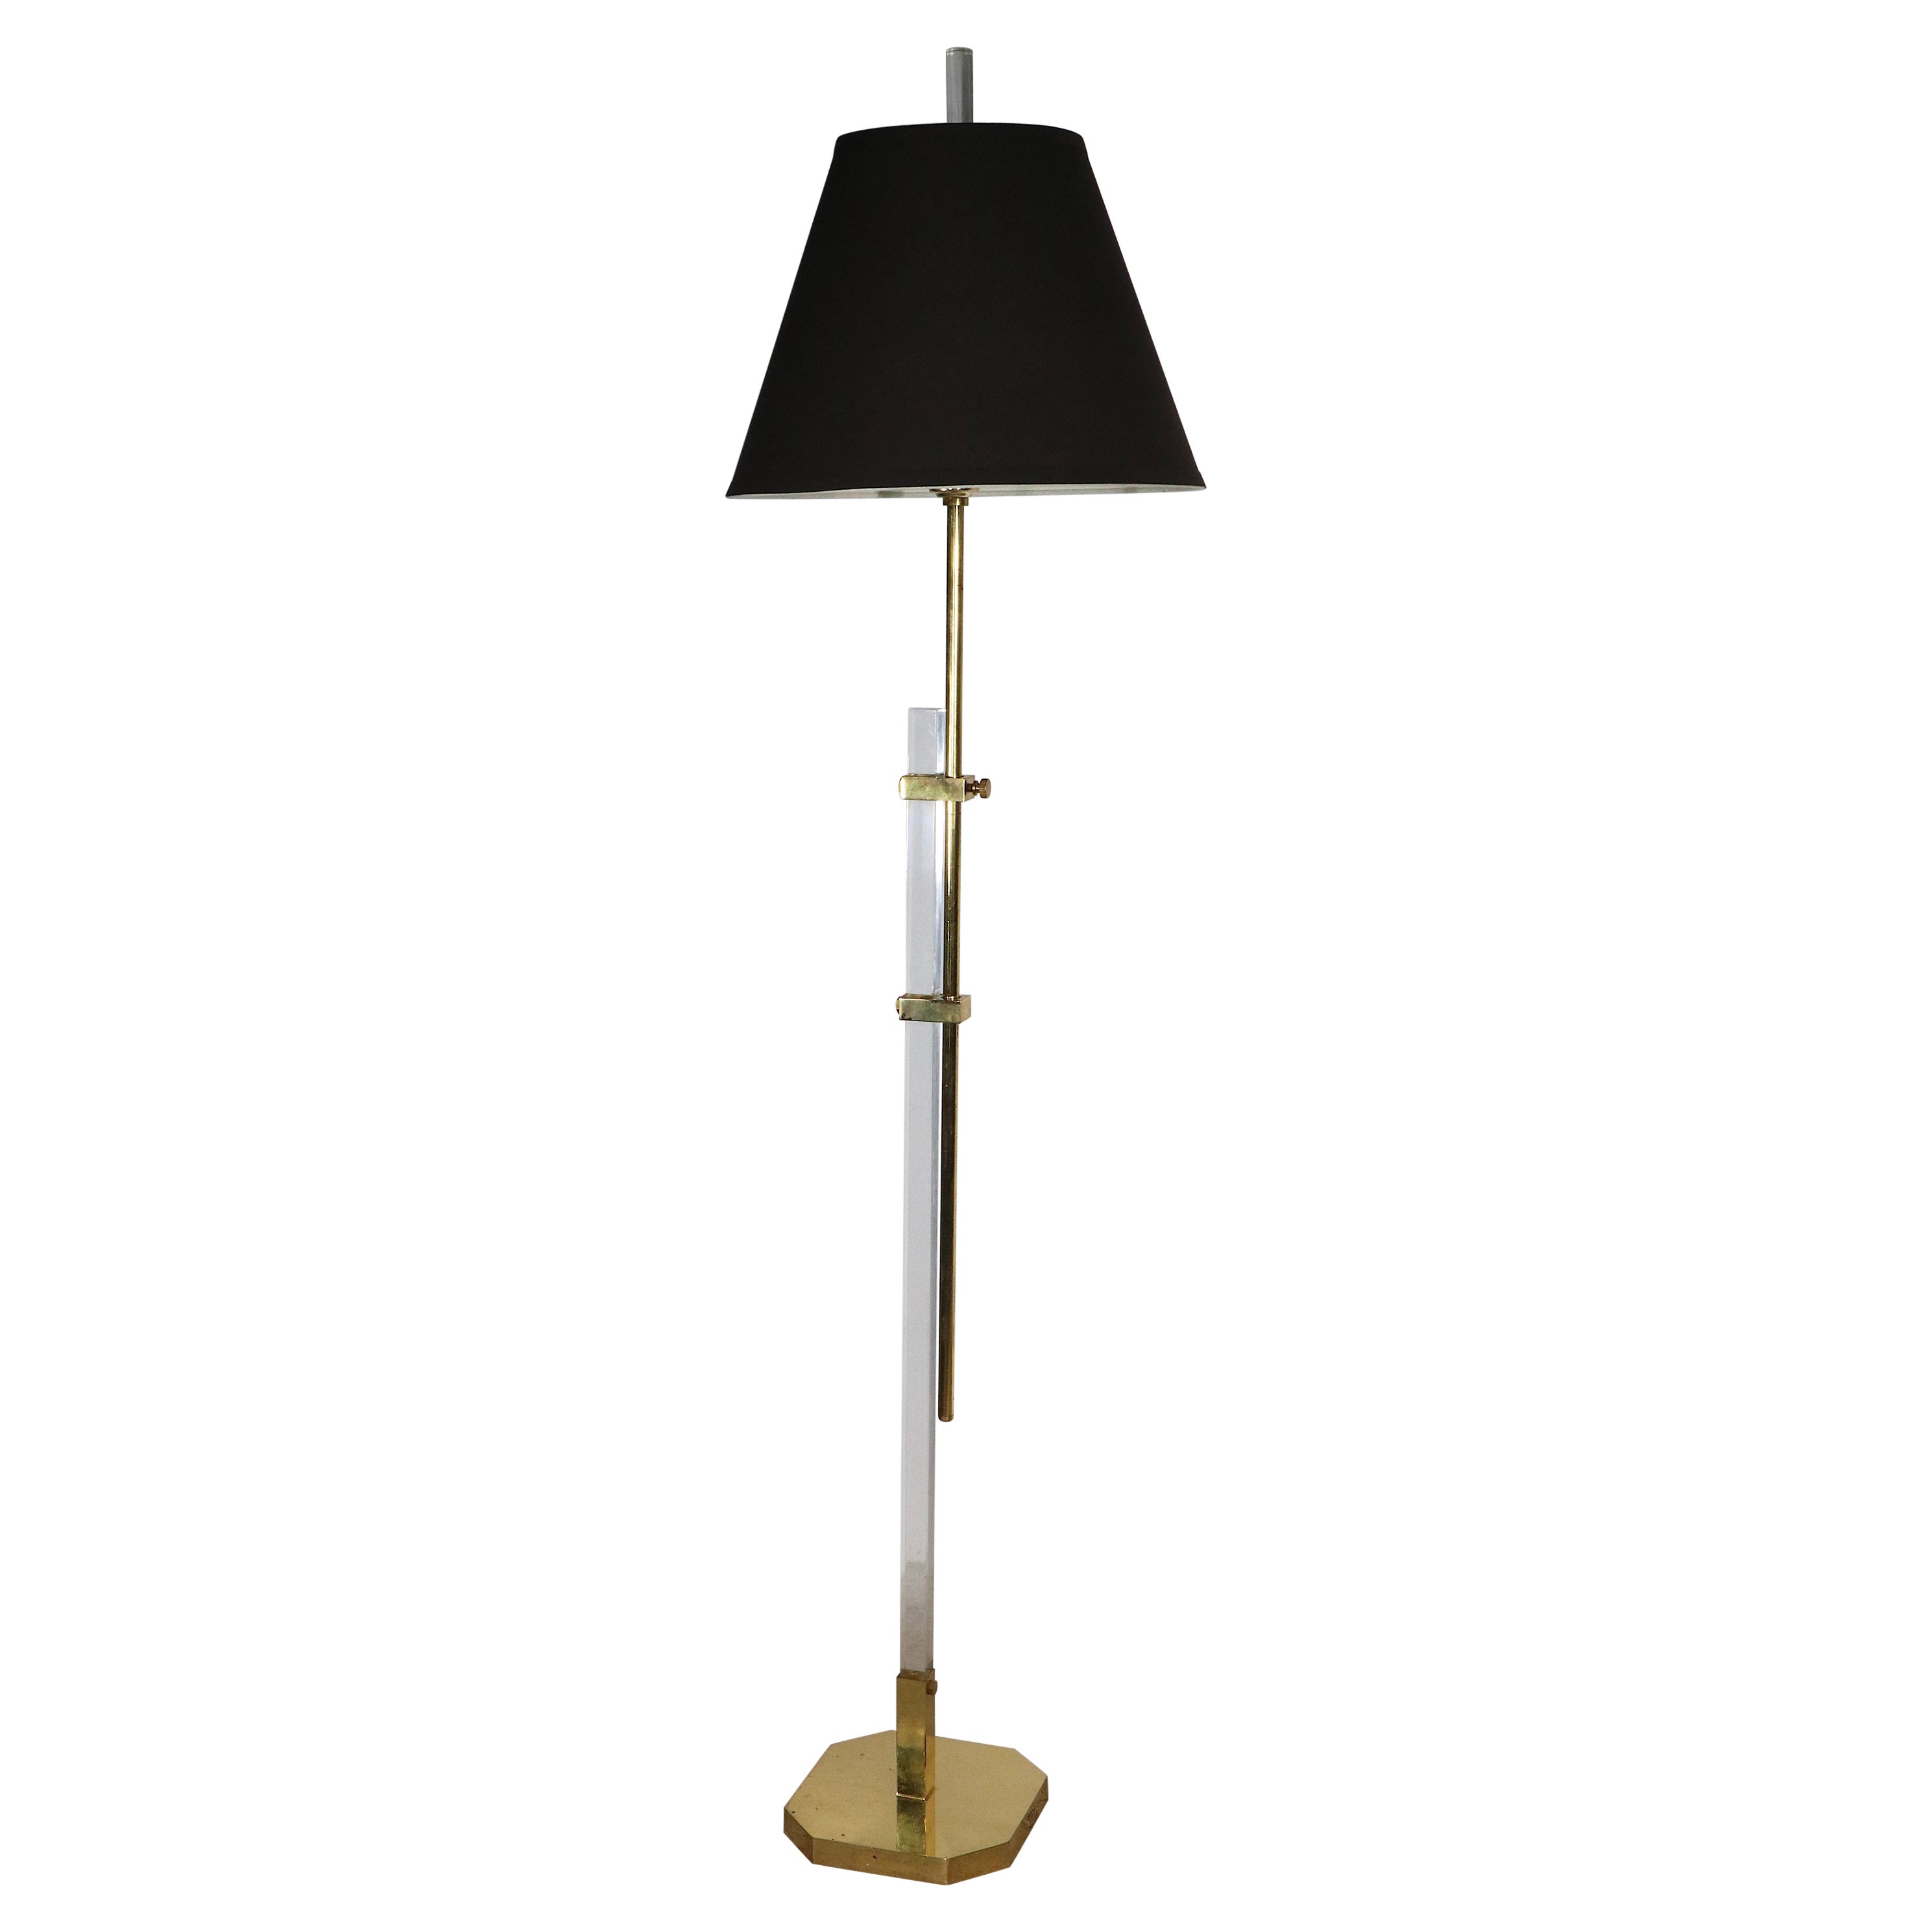  Adjustable Hollywood Regency Style Brass and Lucite Floor Lamp c. 1970/1980's For Sale